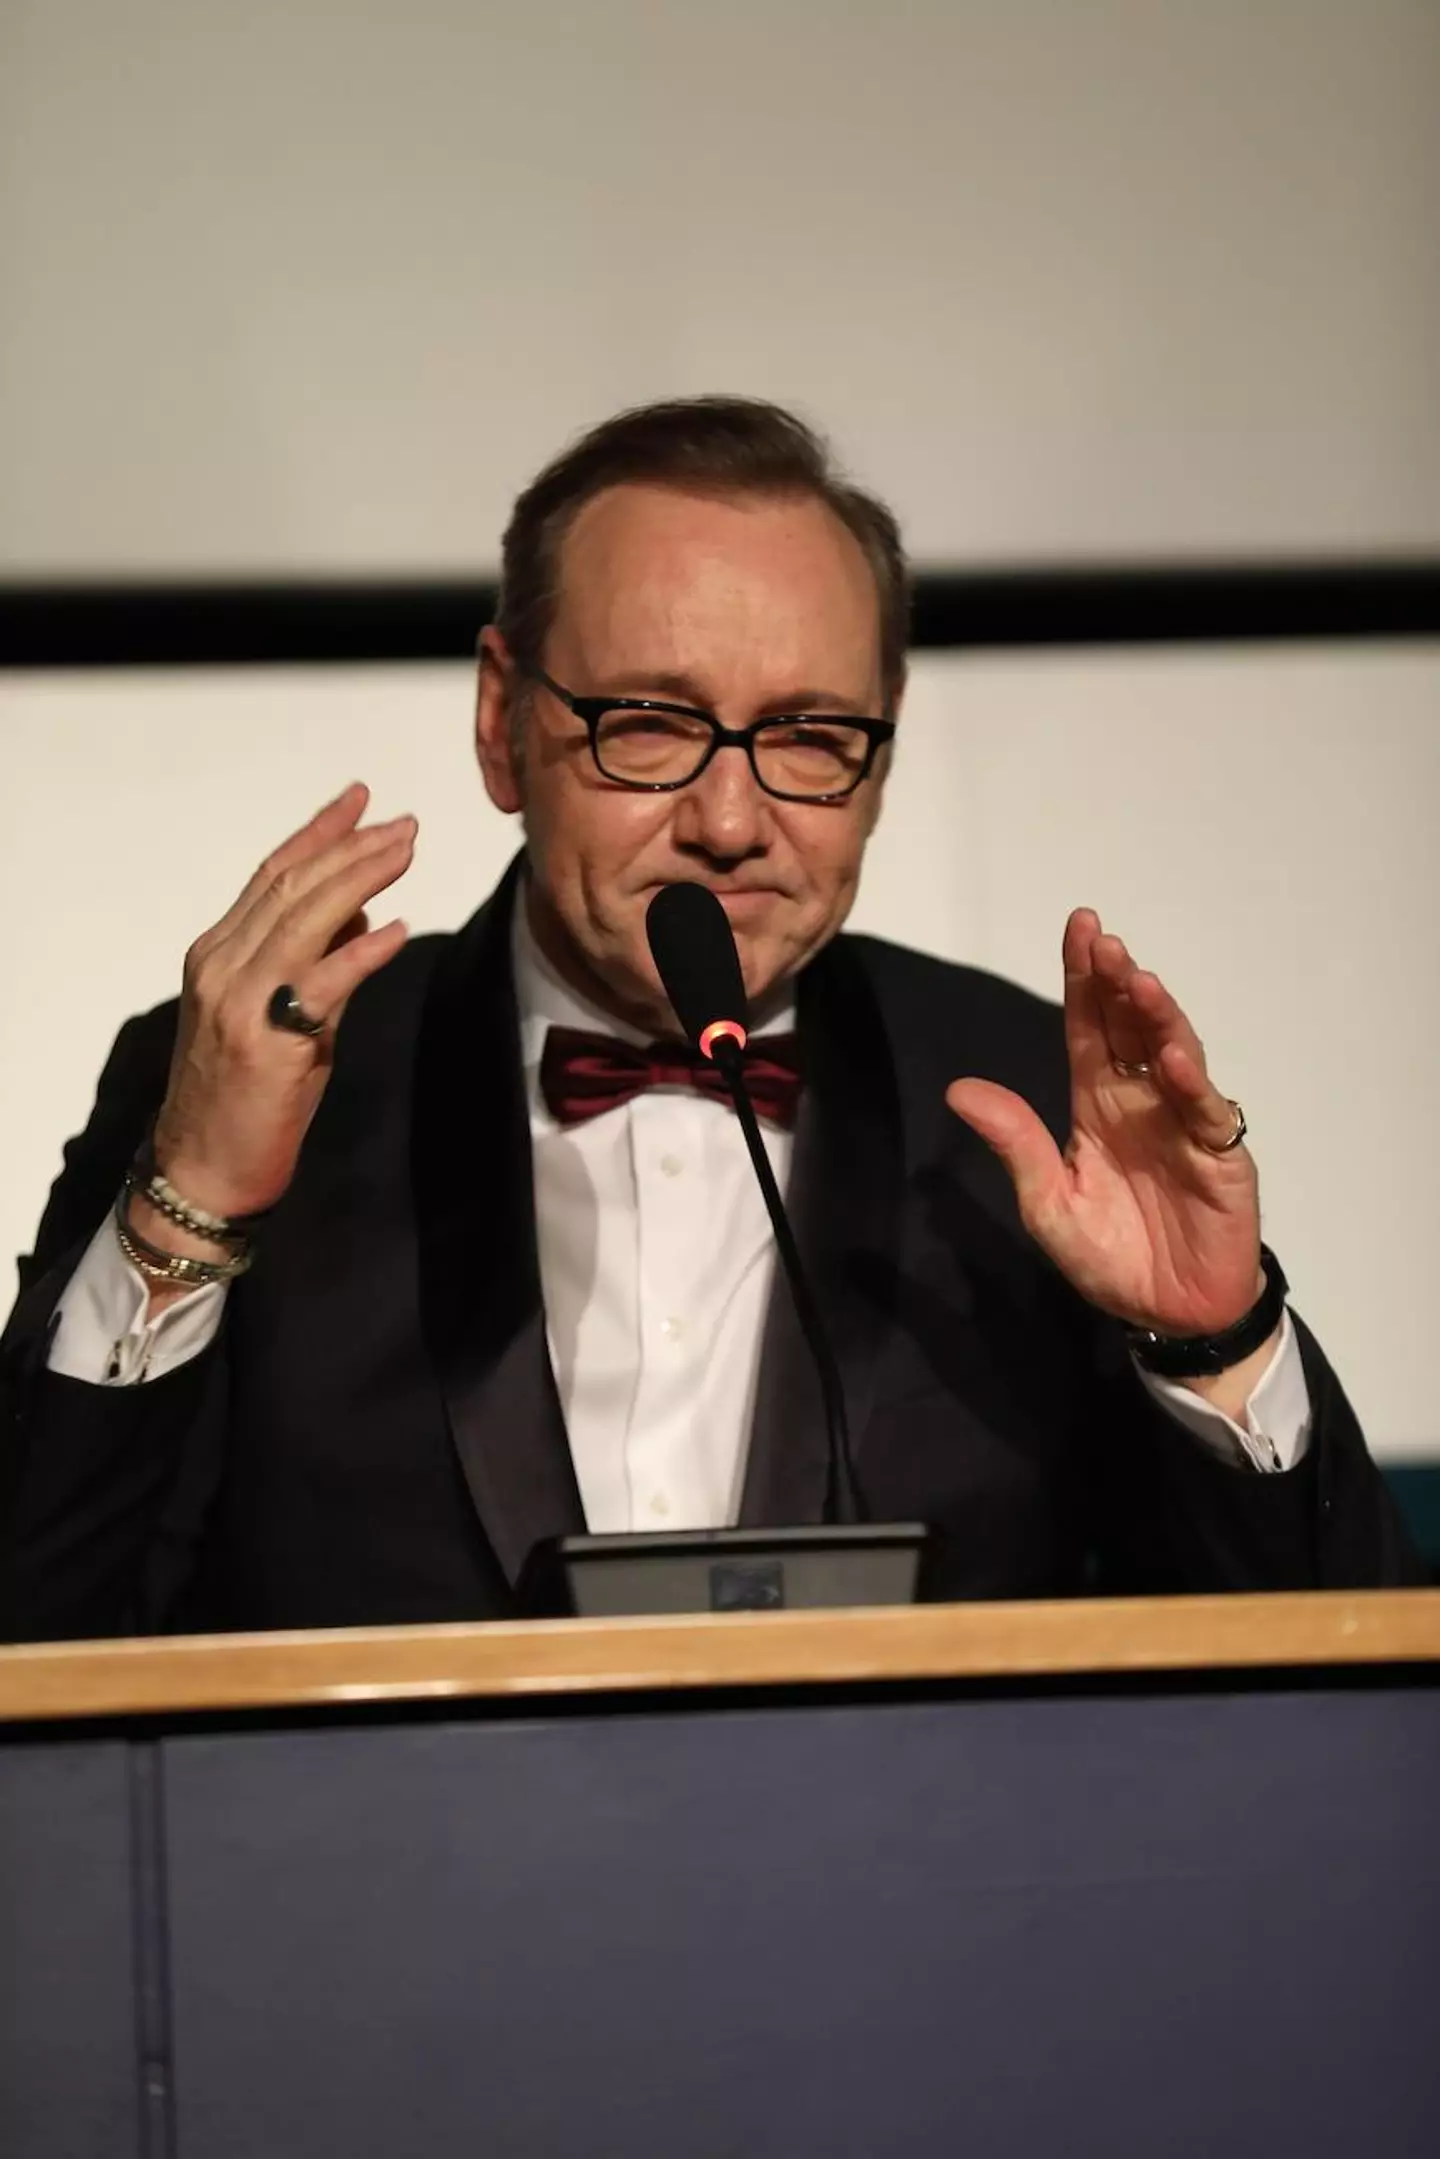 The 63-year-old who won a lifetime achievement award from the Museo Nazionale del Cinema made a speech in front of a sold out crowd in Turin, Italy on Monday (16 January).